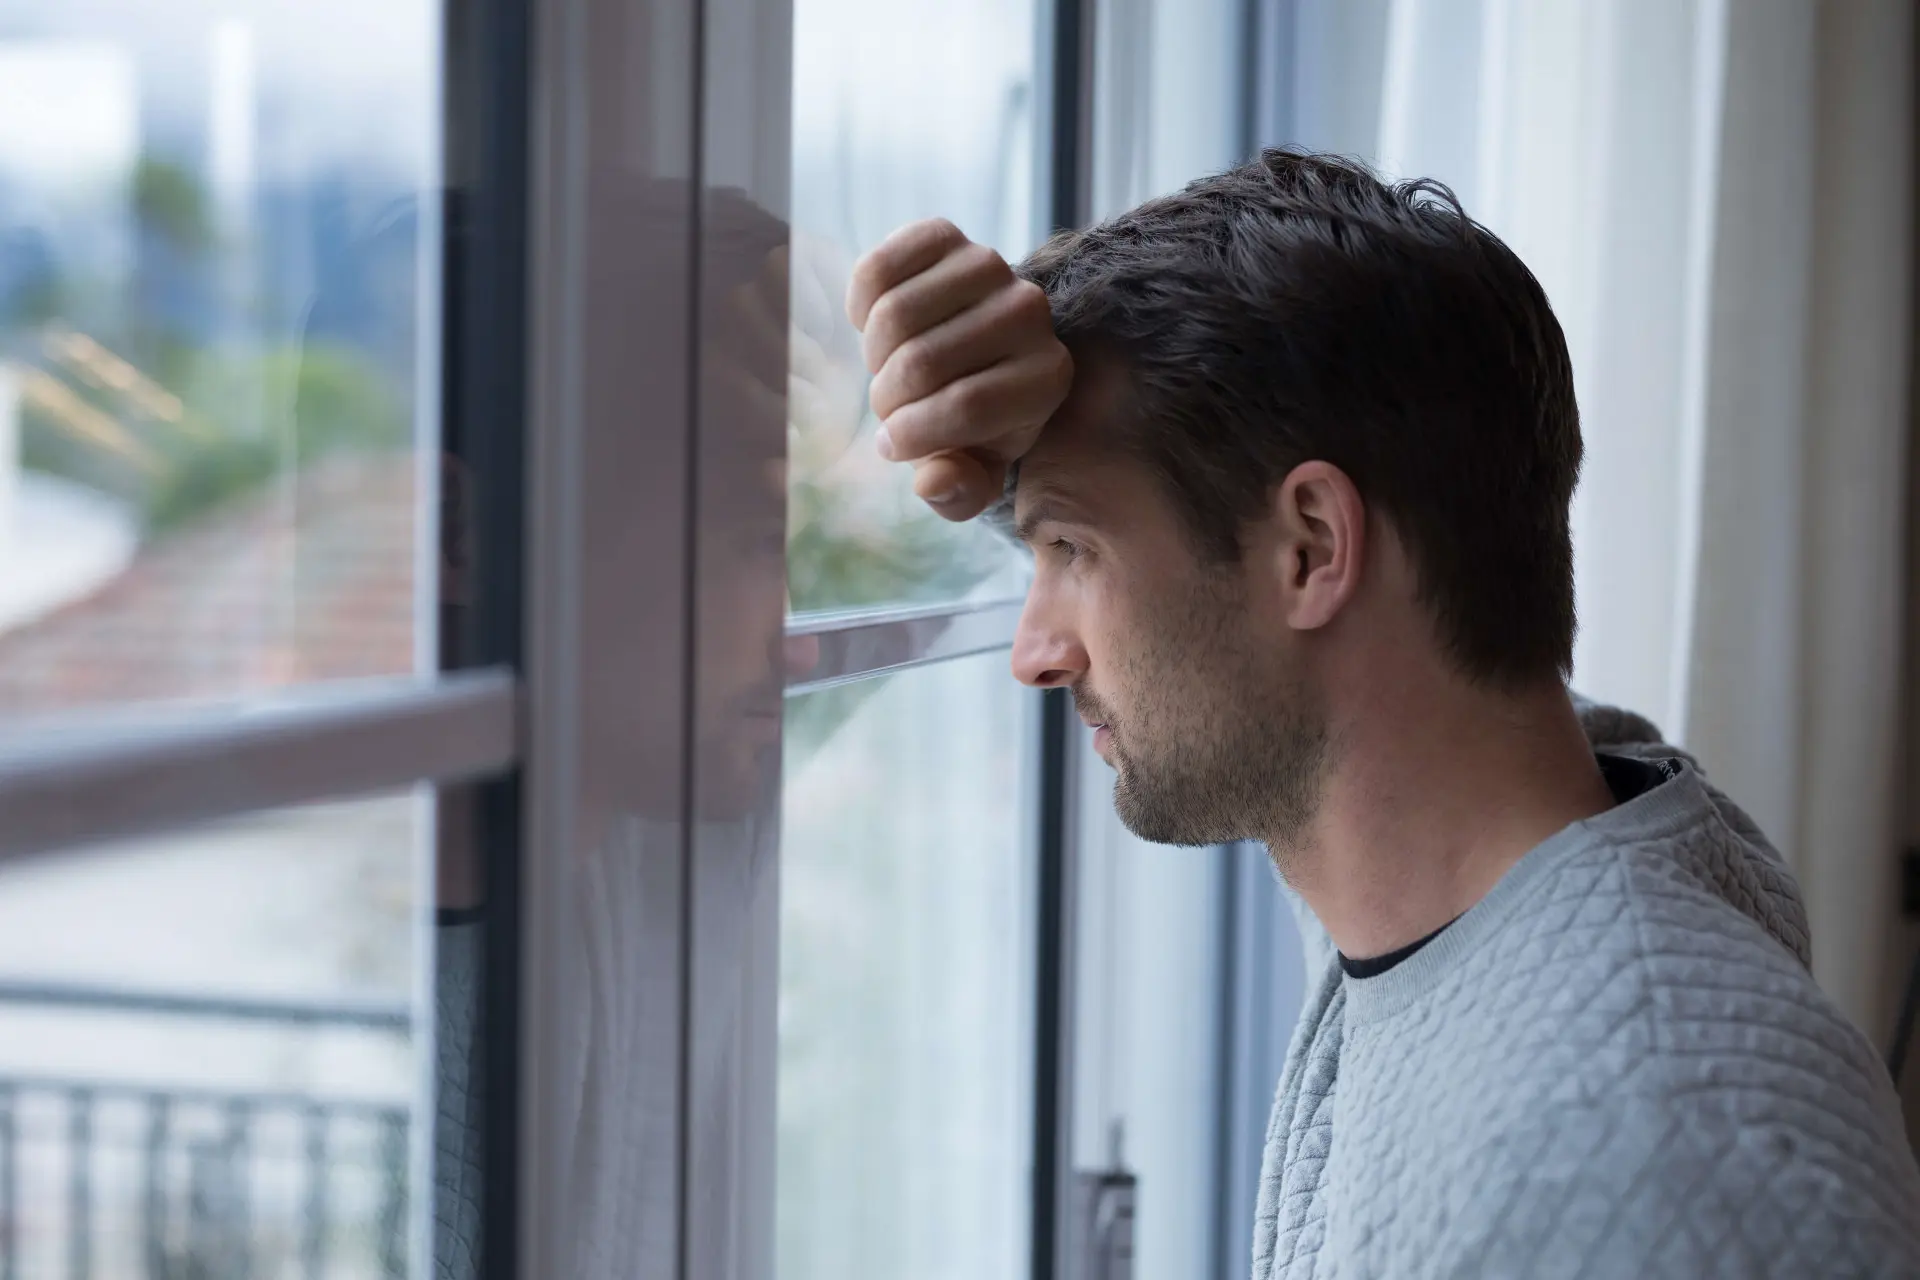 a person who may be a survivor of sexual abuse looks out of a window, deep in thought about what they might need to know about abuse suffered